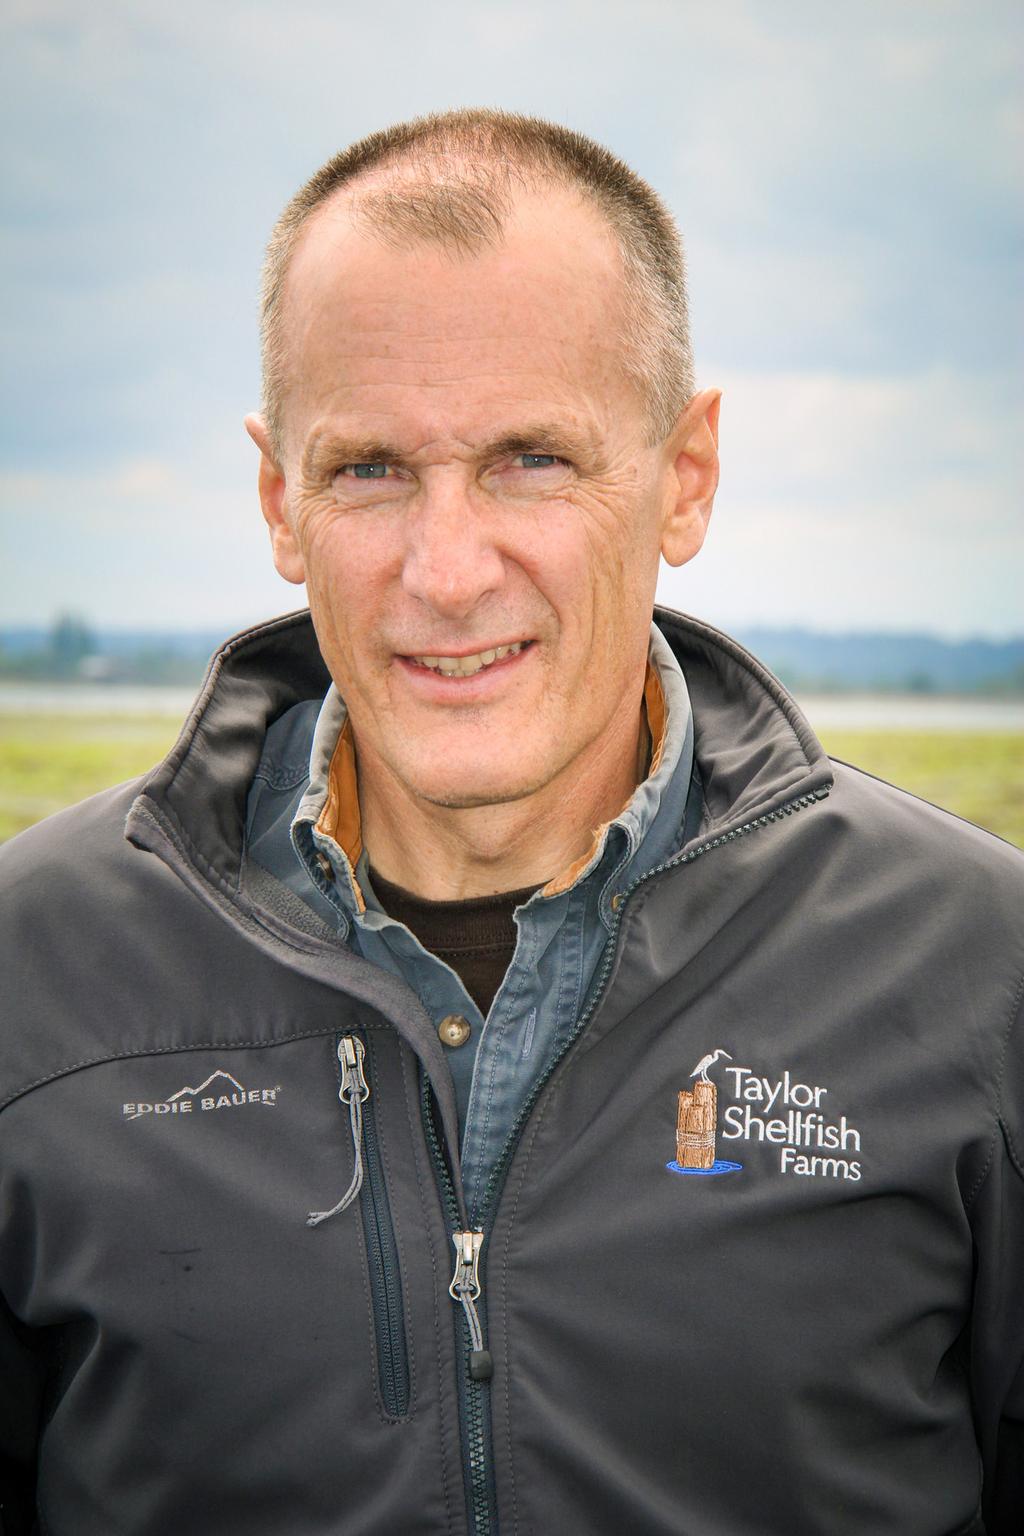 Since receiving his degree in shellfish biology from the University of Washington in 1981 Bill Dewey has worked for over thirty years as a shellfish farmer in Washington State.